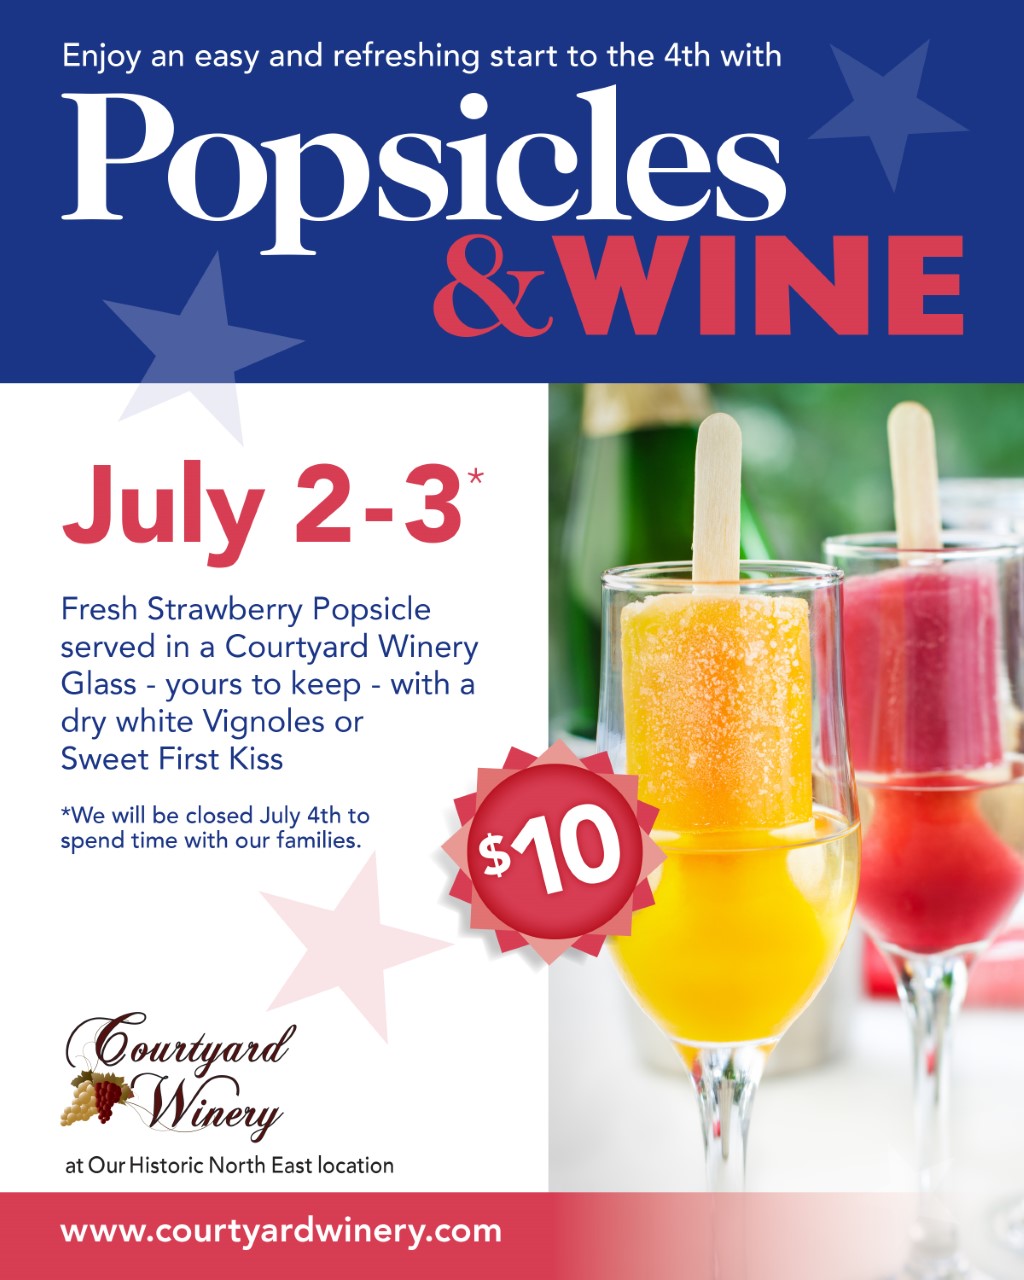 Courtyard Winery presents Popsicles & Wine